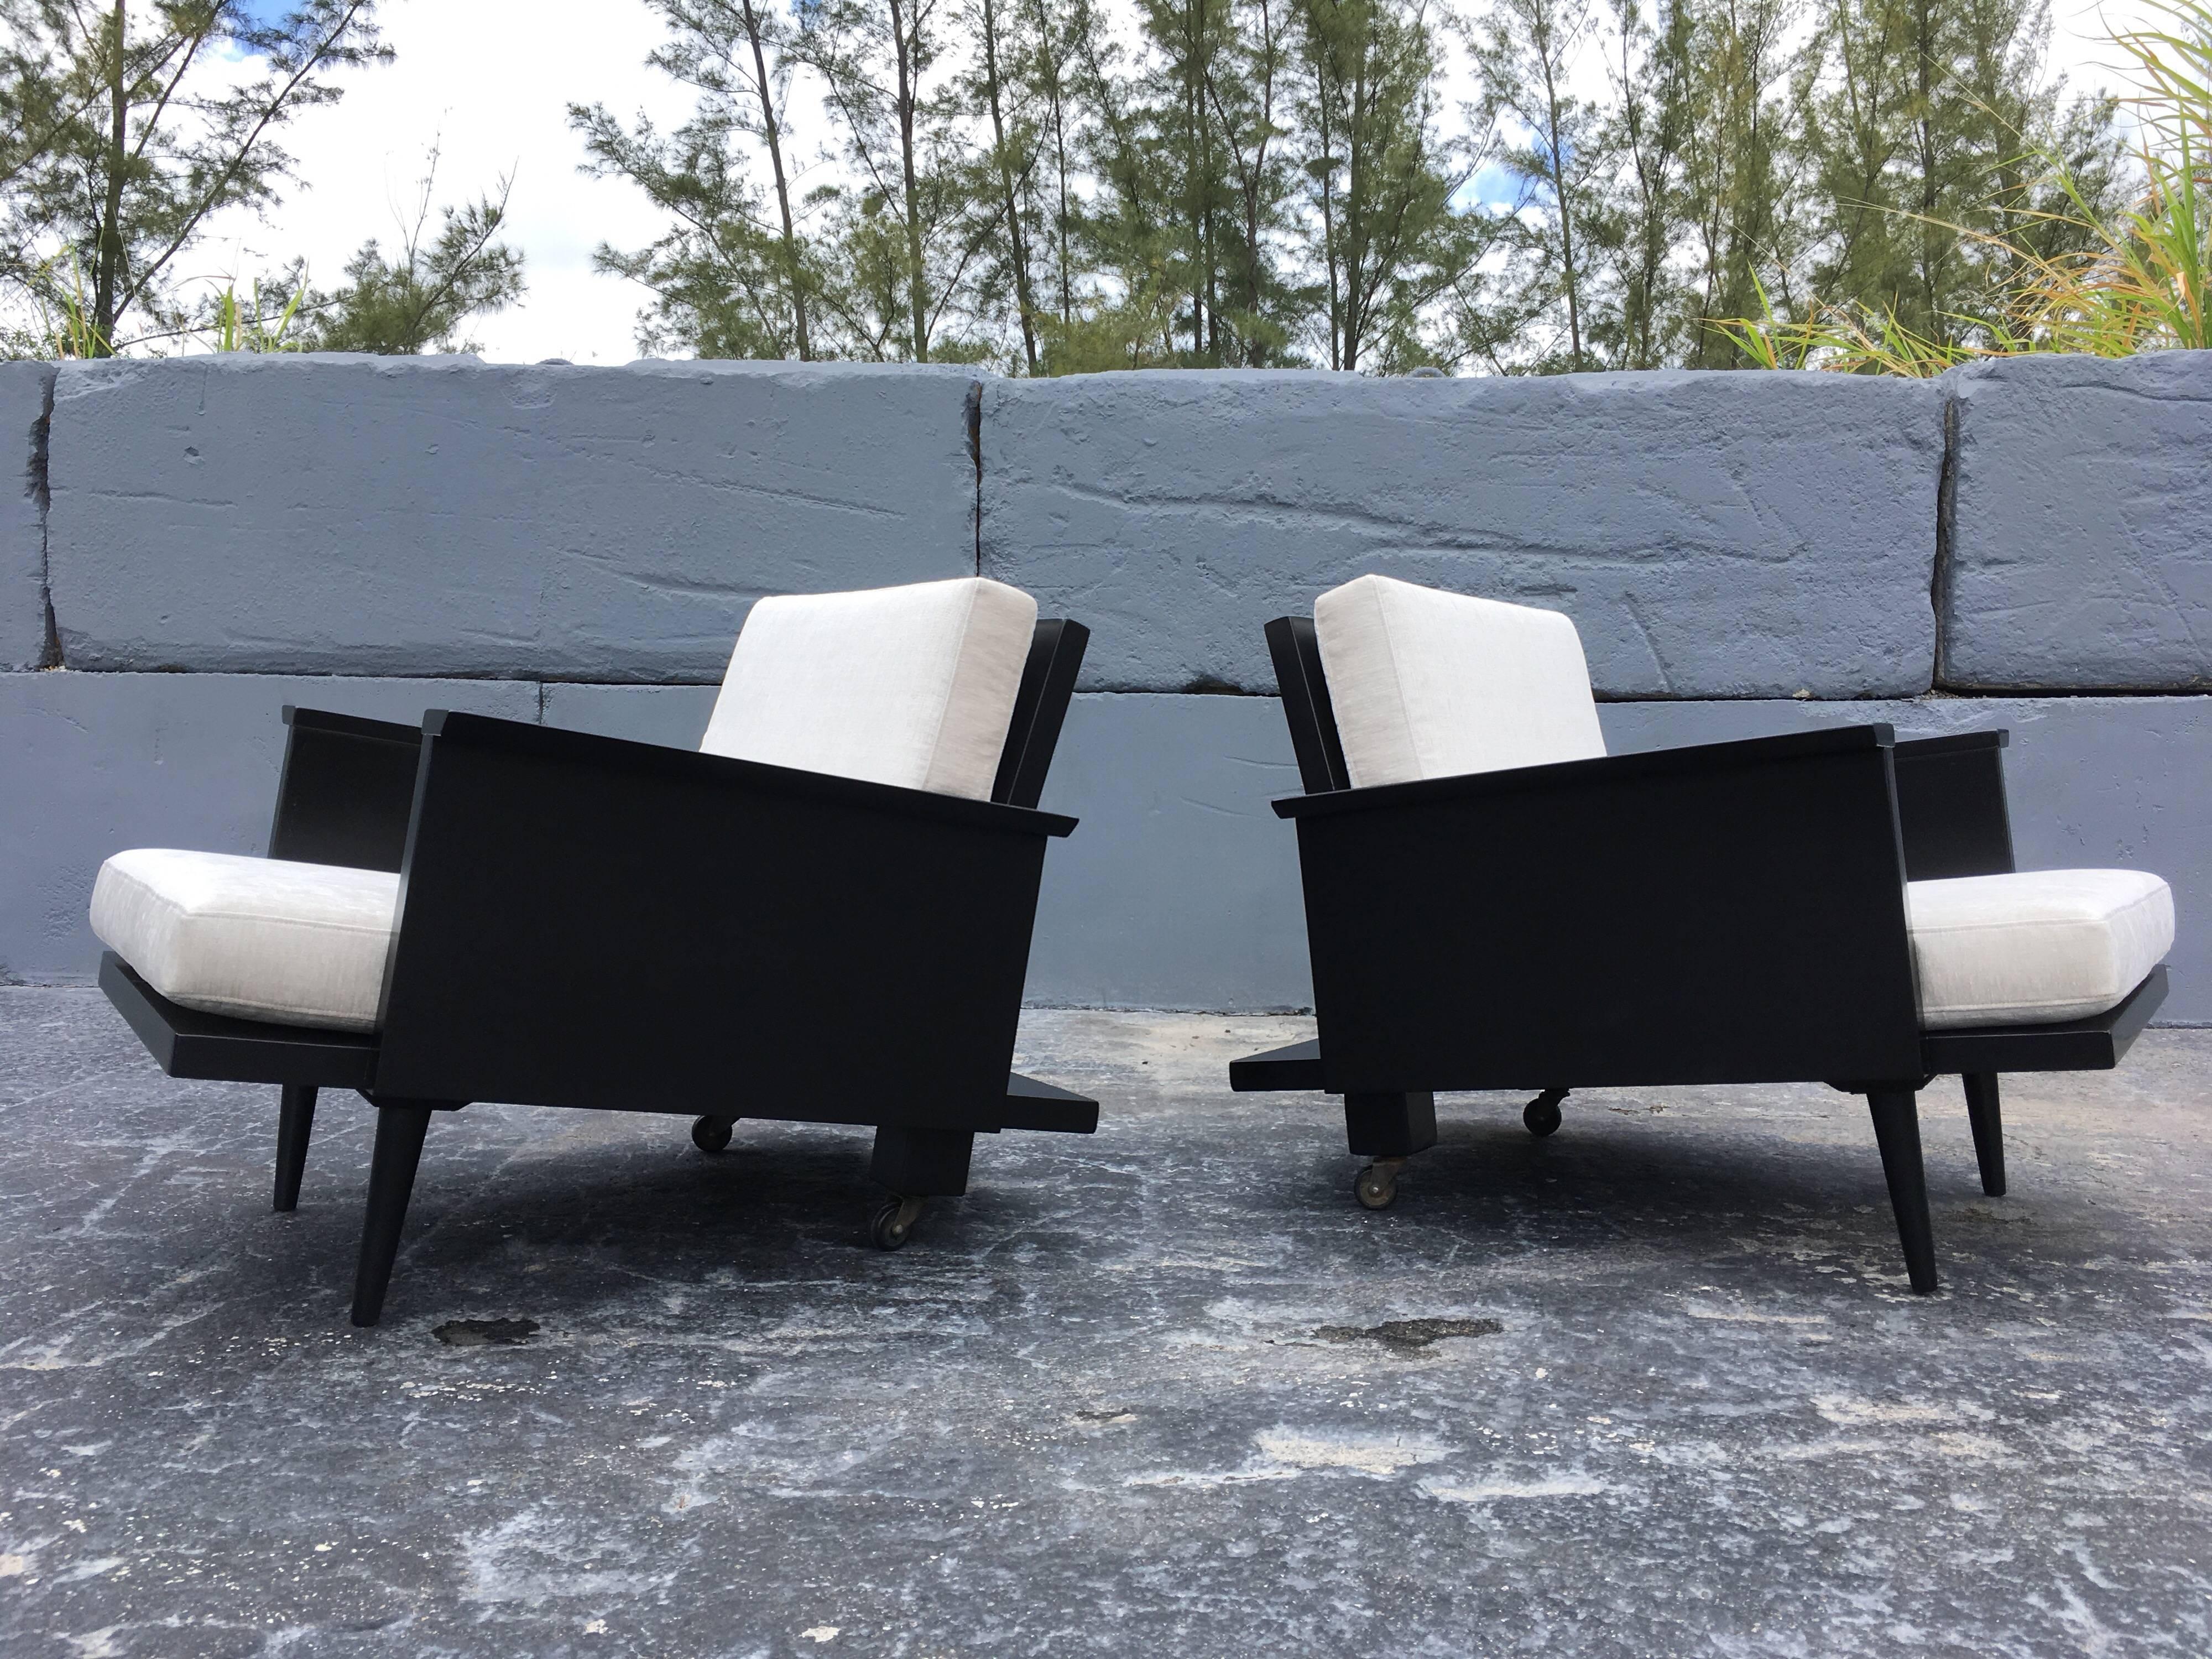 Very interesting pair of 1950s lounge chairs by Modernage. Black painted wood frames with tapered front legs and casters at the back.